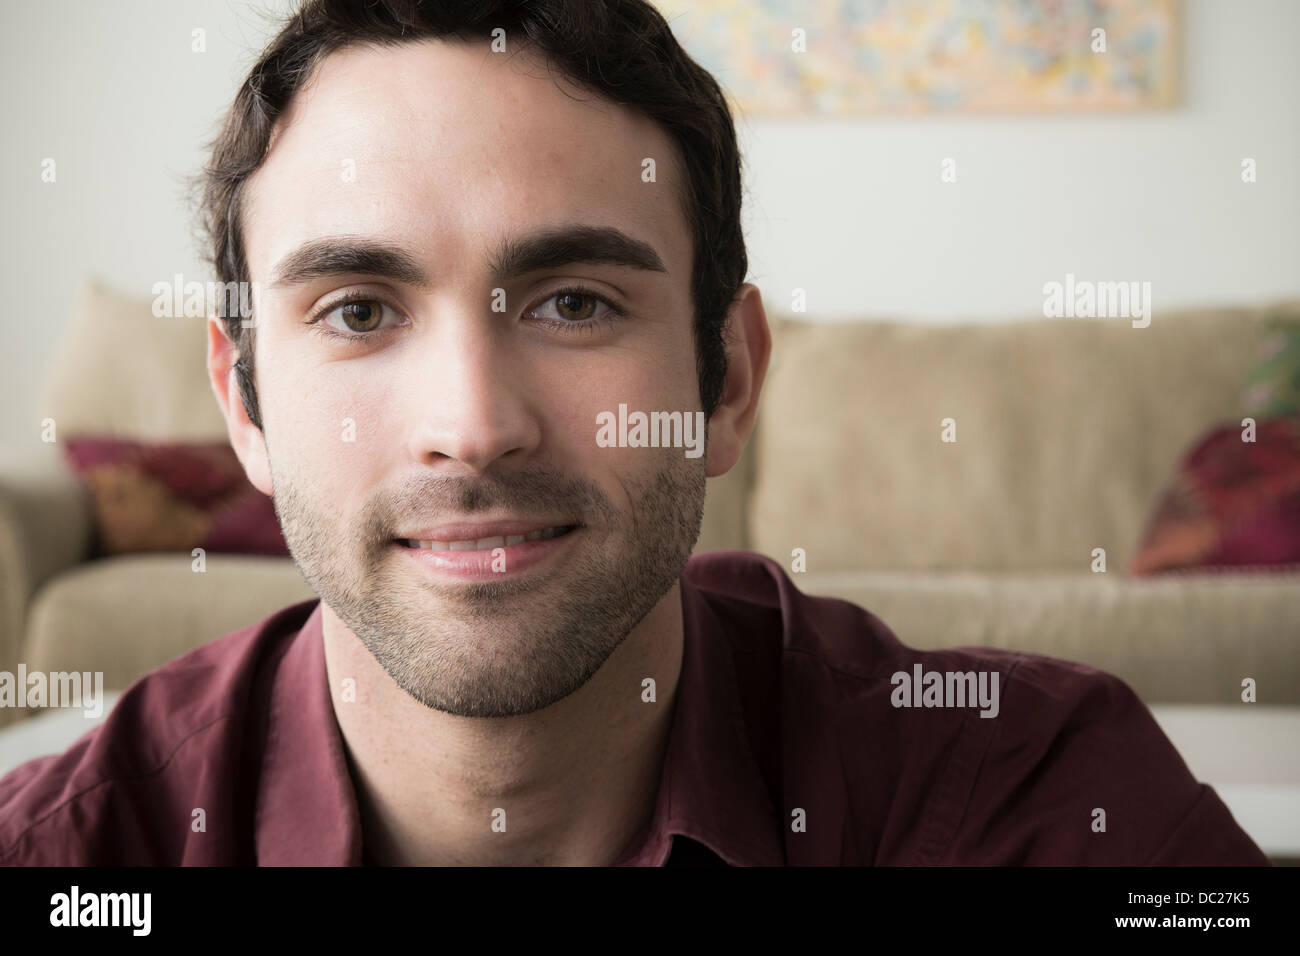 Portrait of young man with black hair Stock Photo